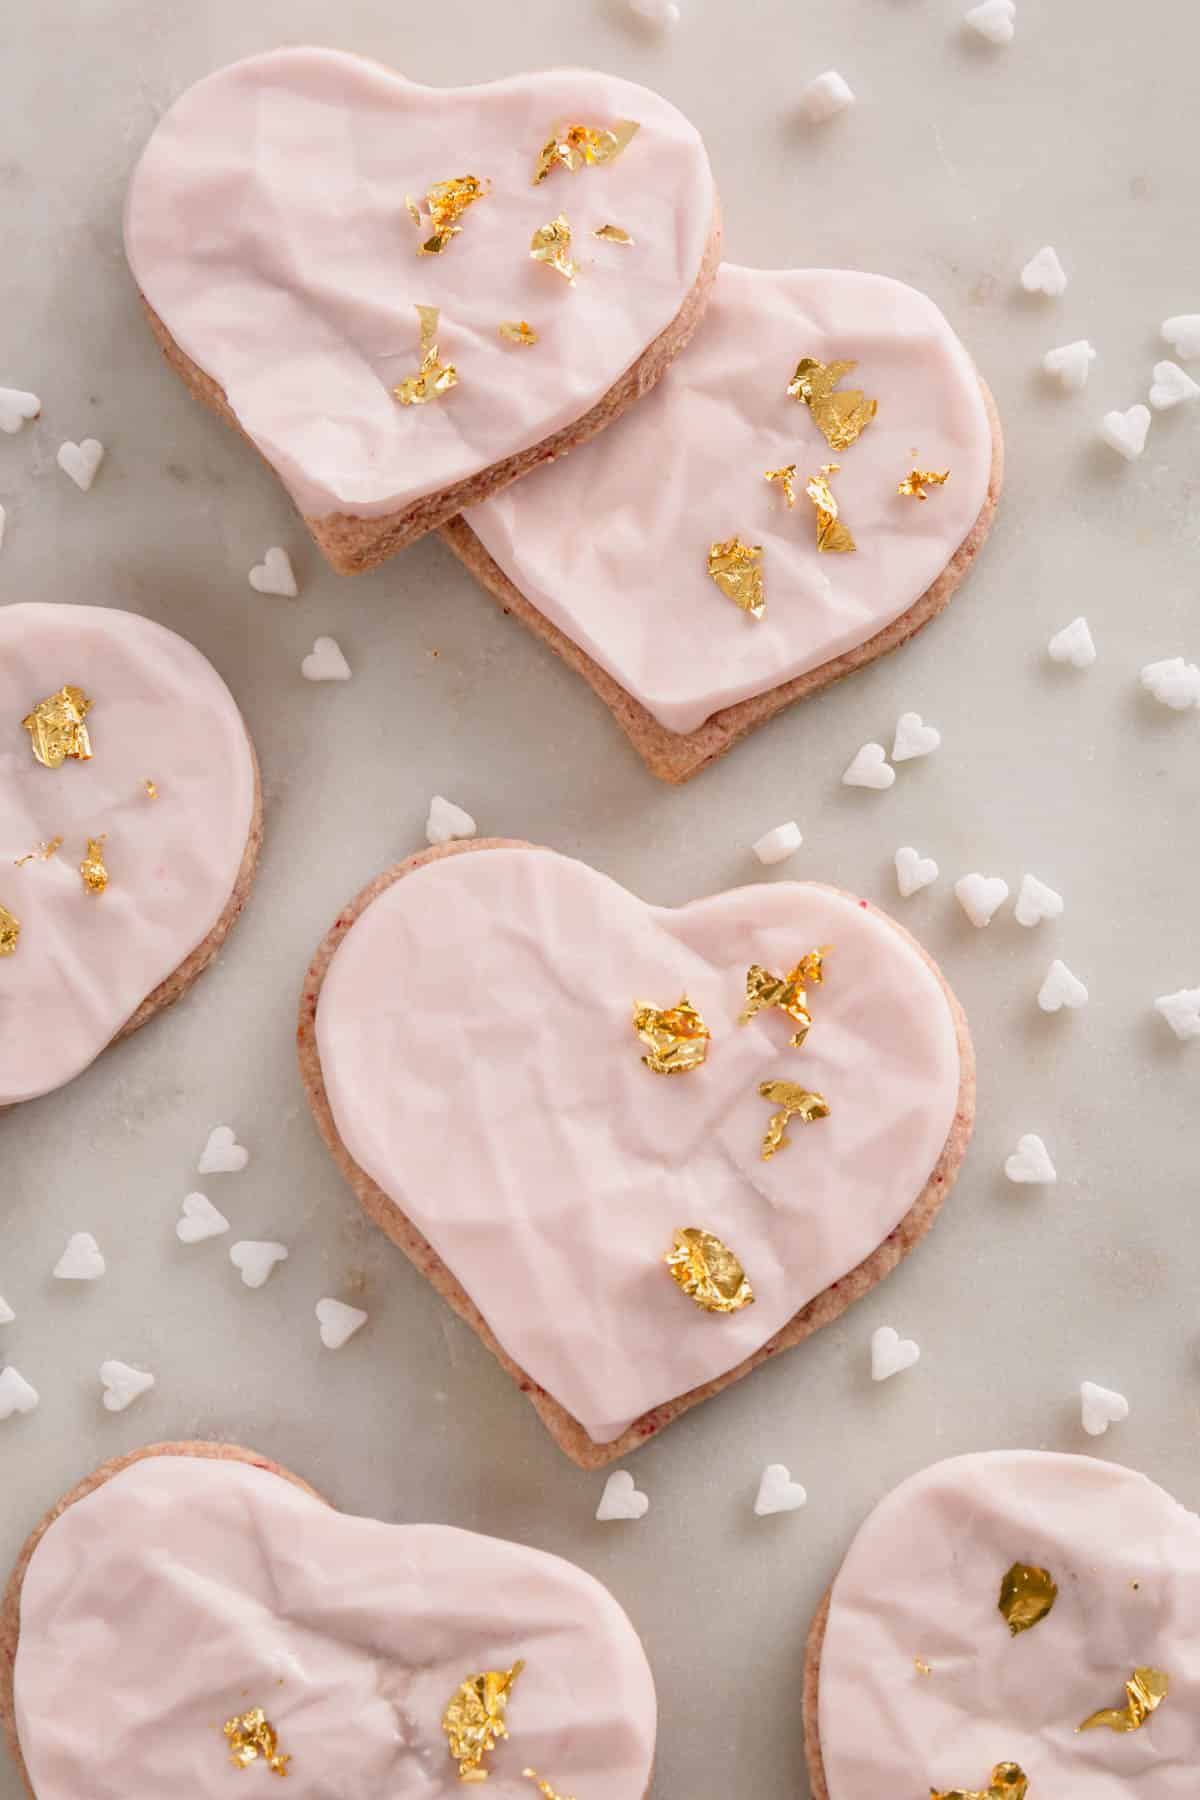 Raspberry heart-shaped sugar cookies with pink icing and gold leaf decoration.